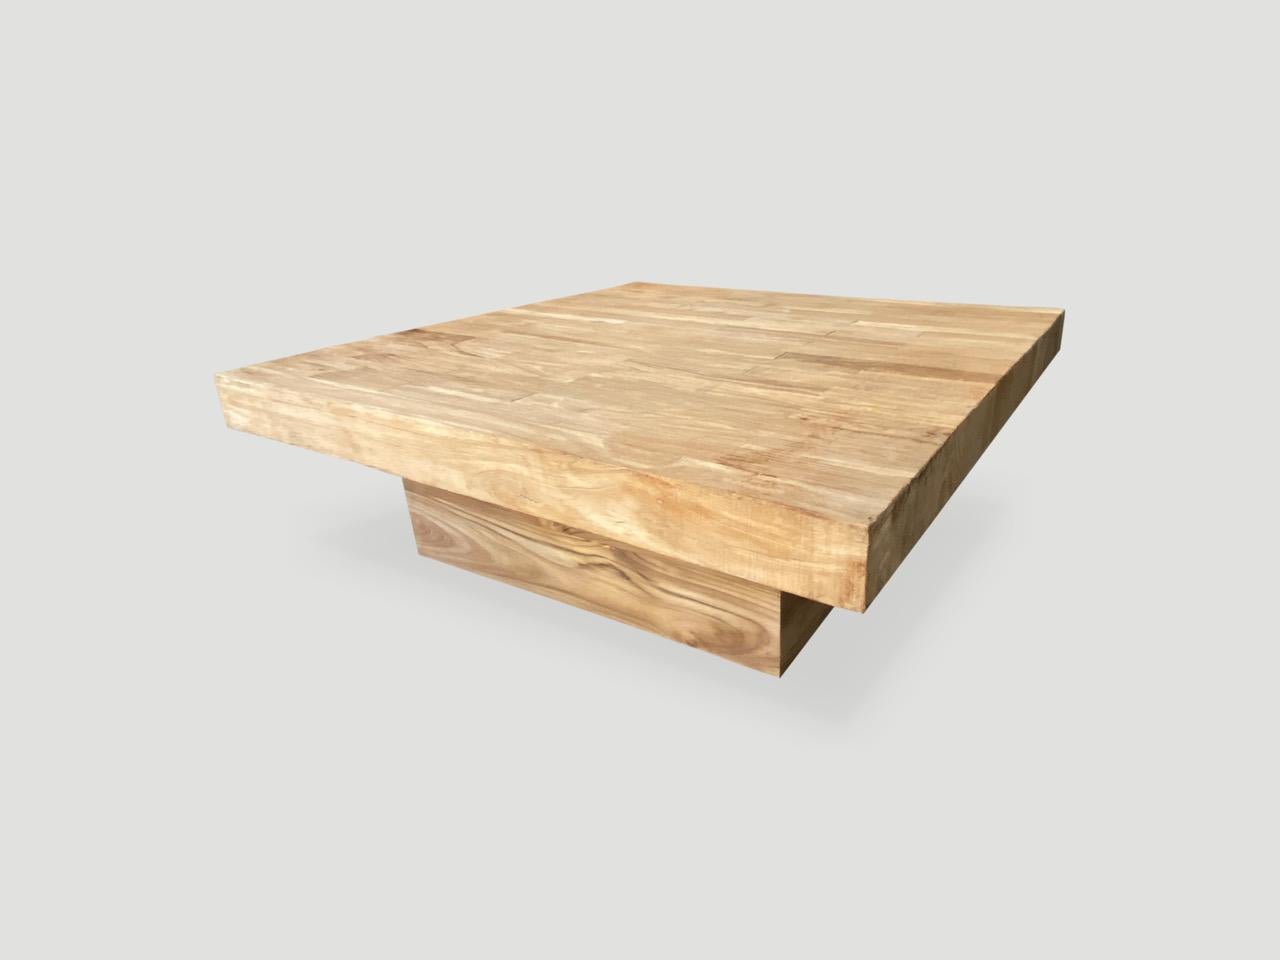 Organic Modern Andrianna Shamaris Reclaimed Square Natural Teak Wood Coffee Table For Sale